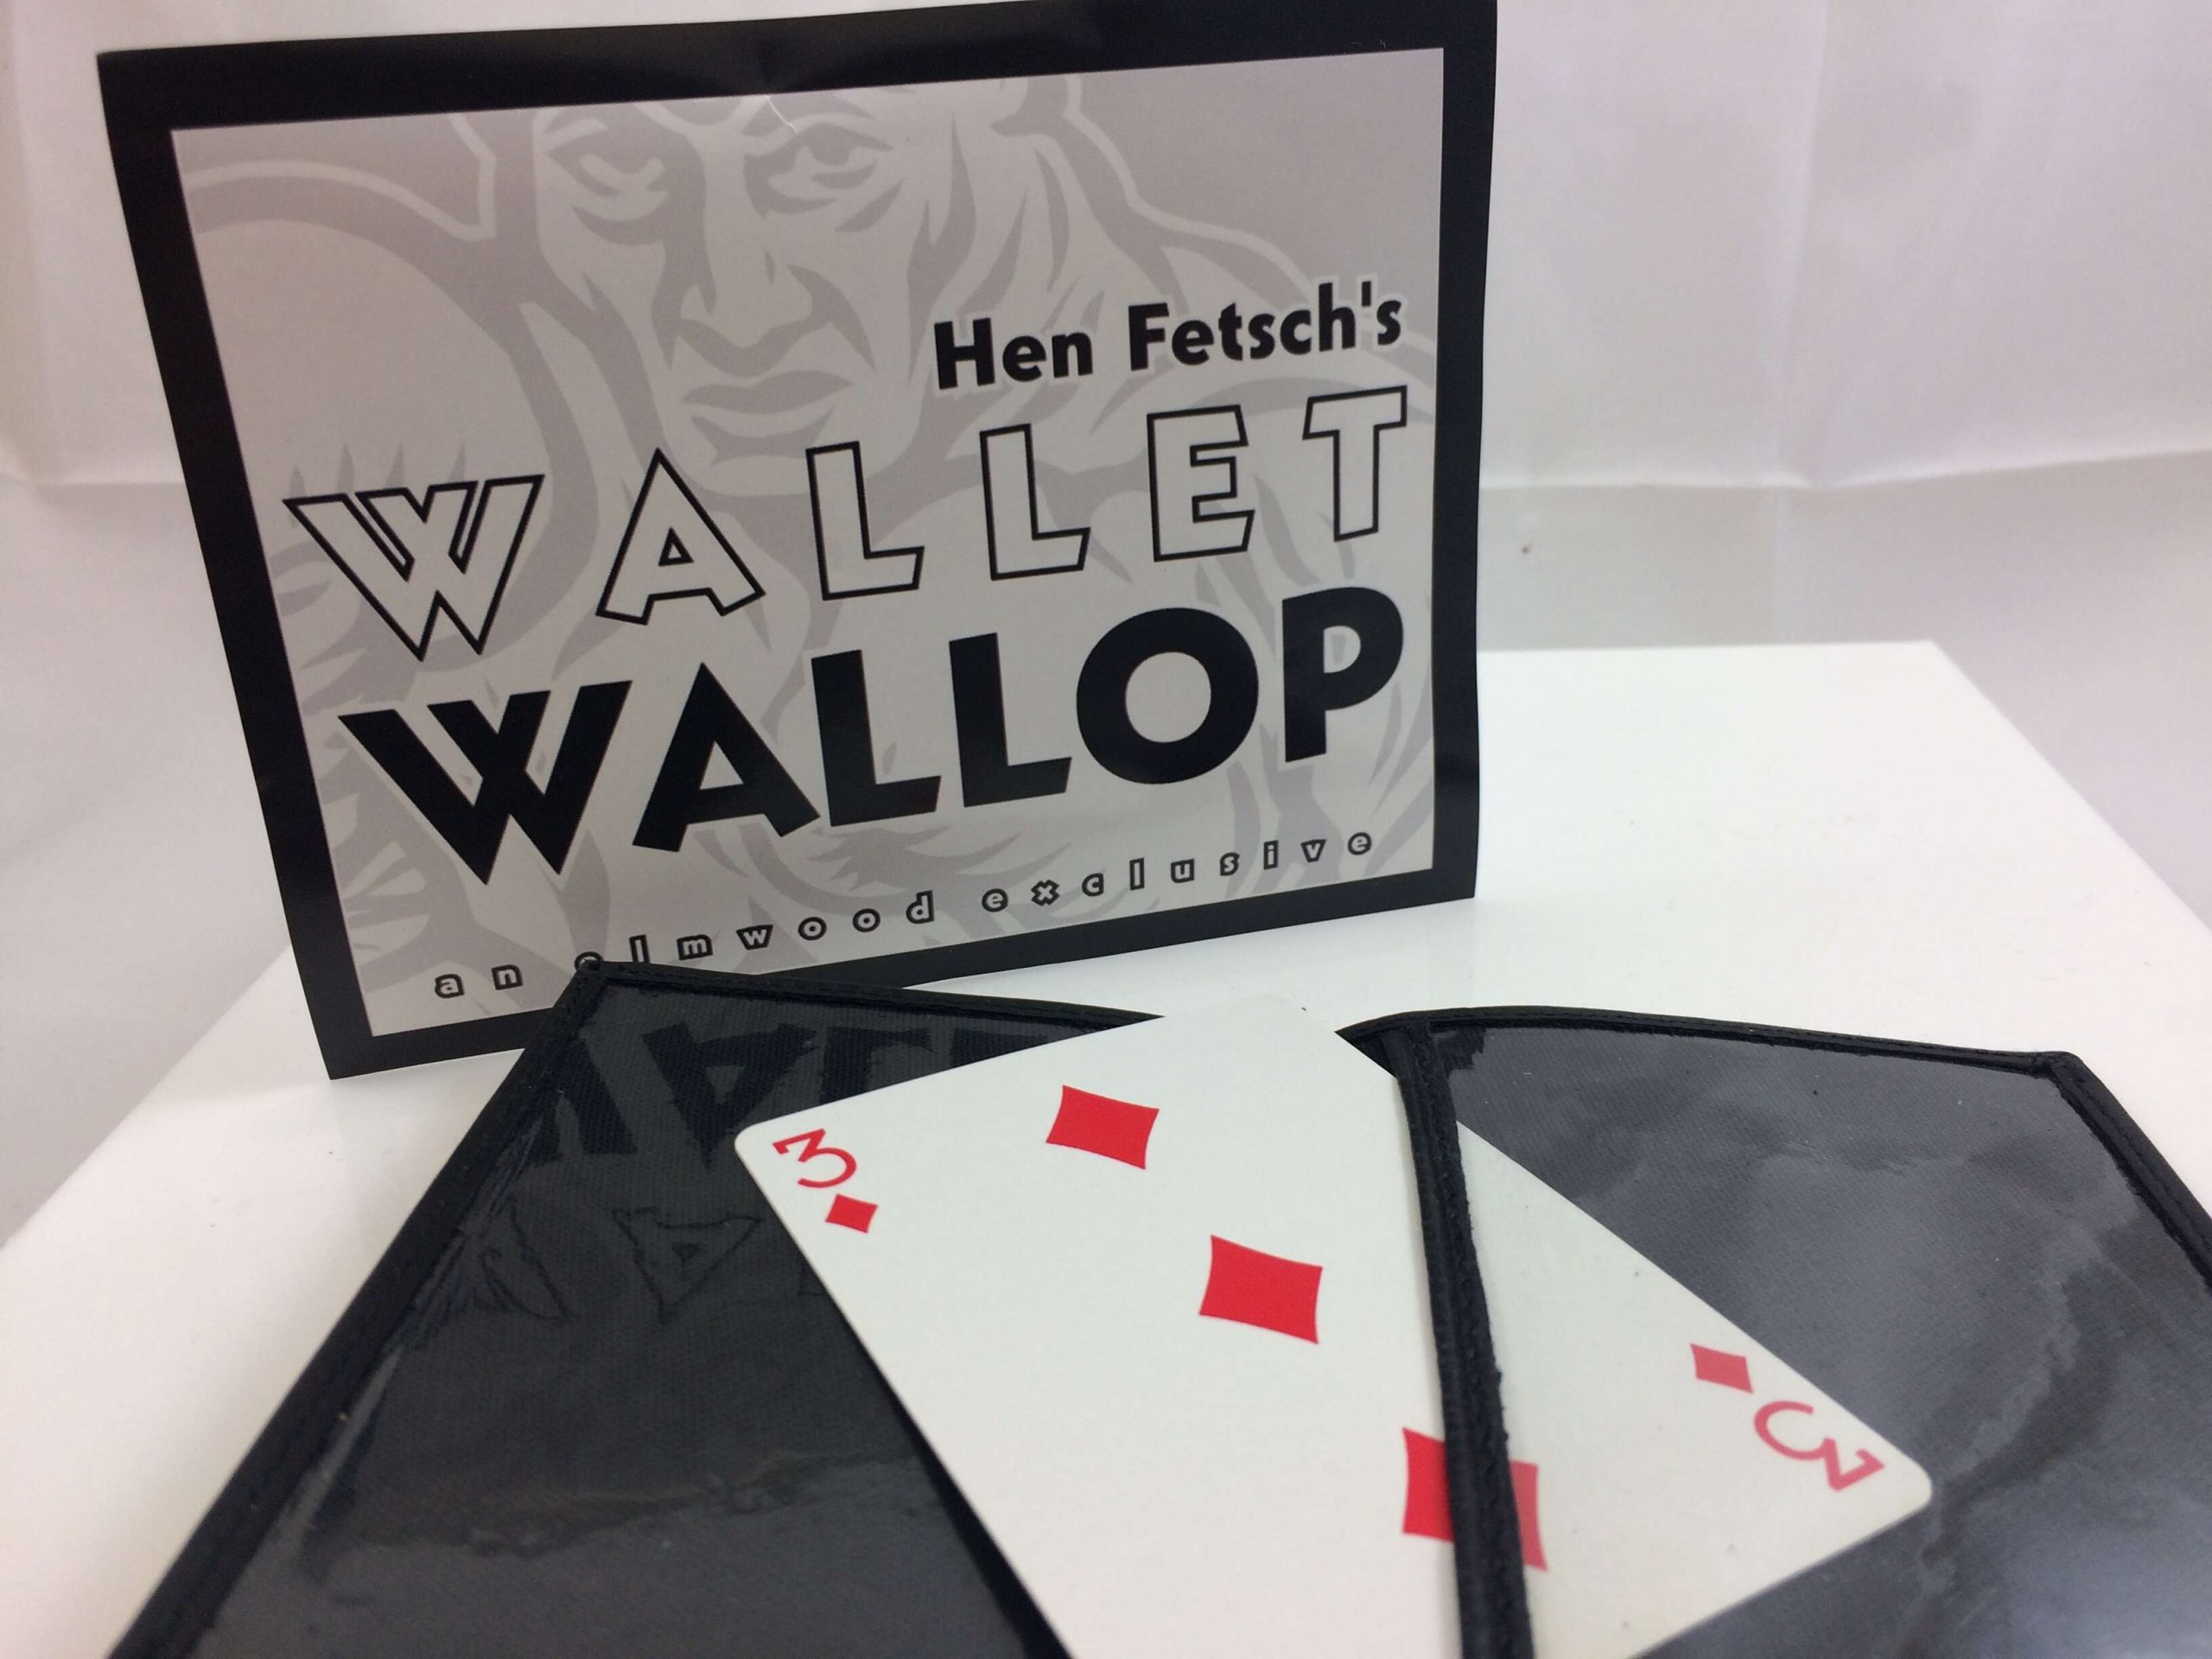 Wallet Wallop Trick by Hen Fetsch open with 3 of diamonds inside and product packaging in background